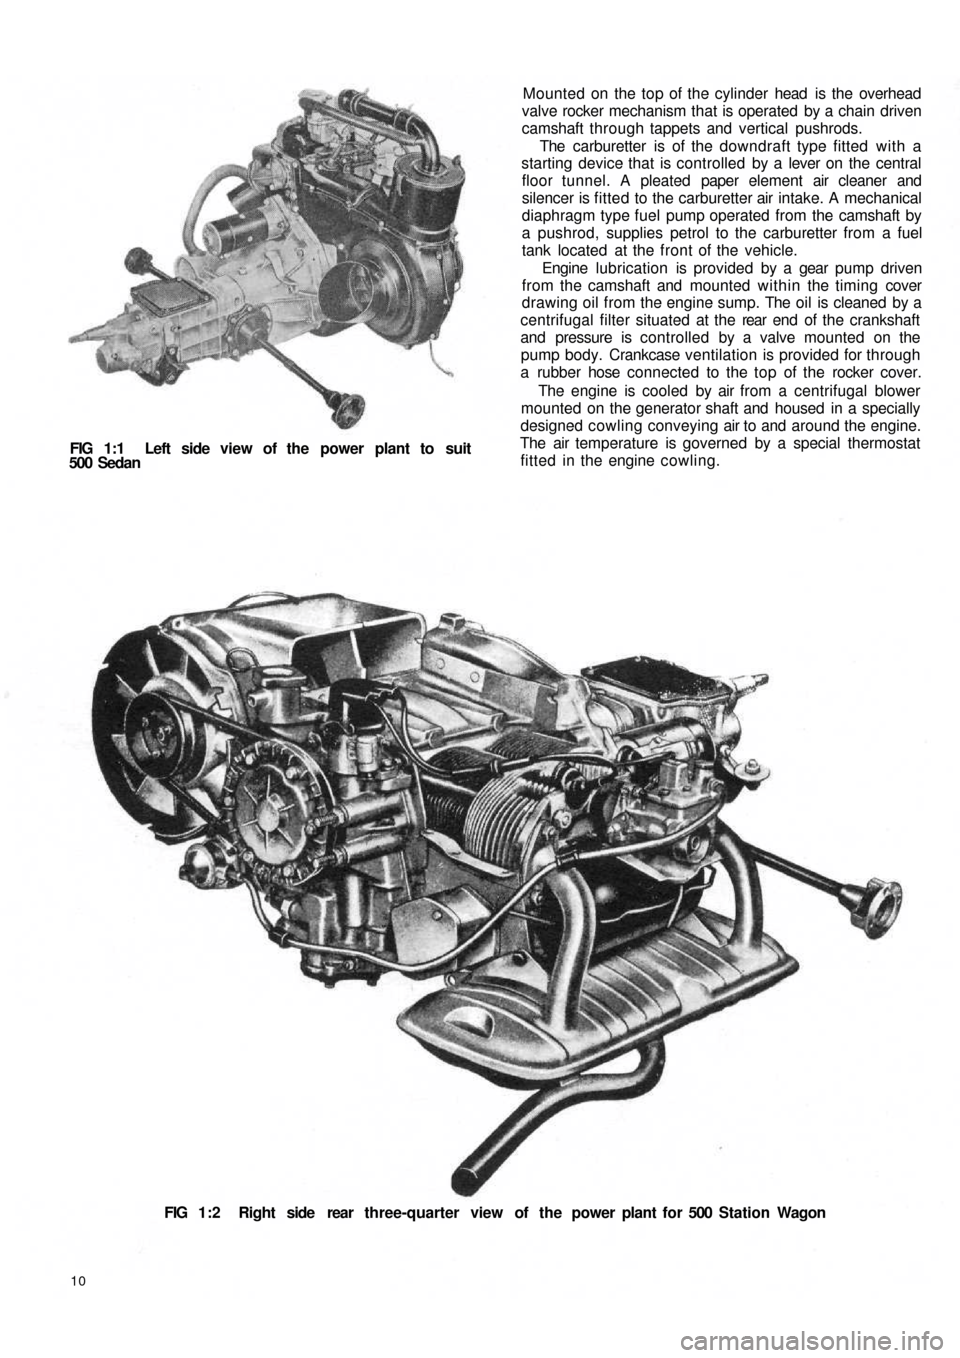 FIAT 500 1957 1.G Workshop Manual FIG 1:1  Left side view of the power plant to suit
500  Sedan
10
FIG 1:2  Right side  rear  three-quarter view of the power plant for 500 Station  Wagon Mounted on the top of the cylinder  head  is th